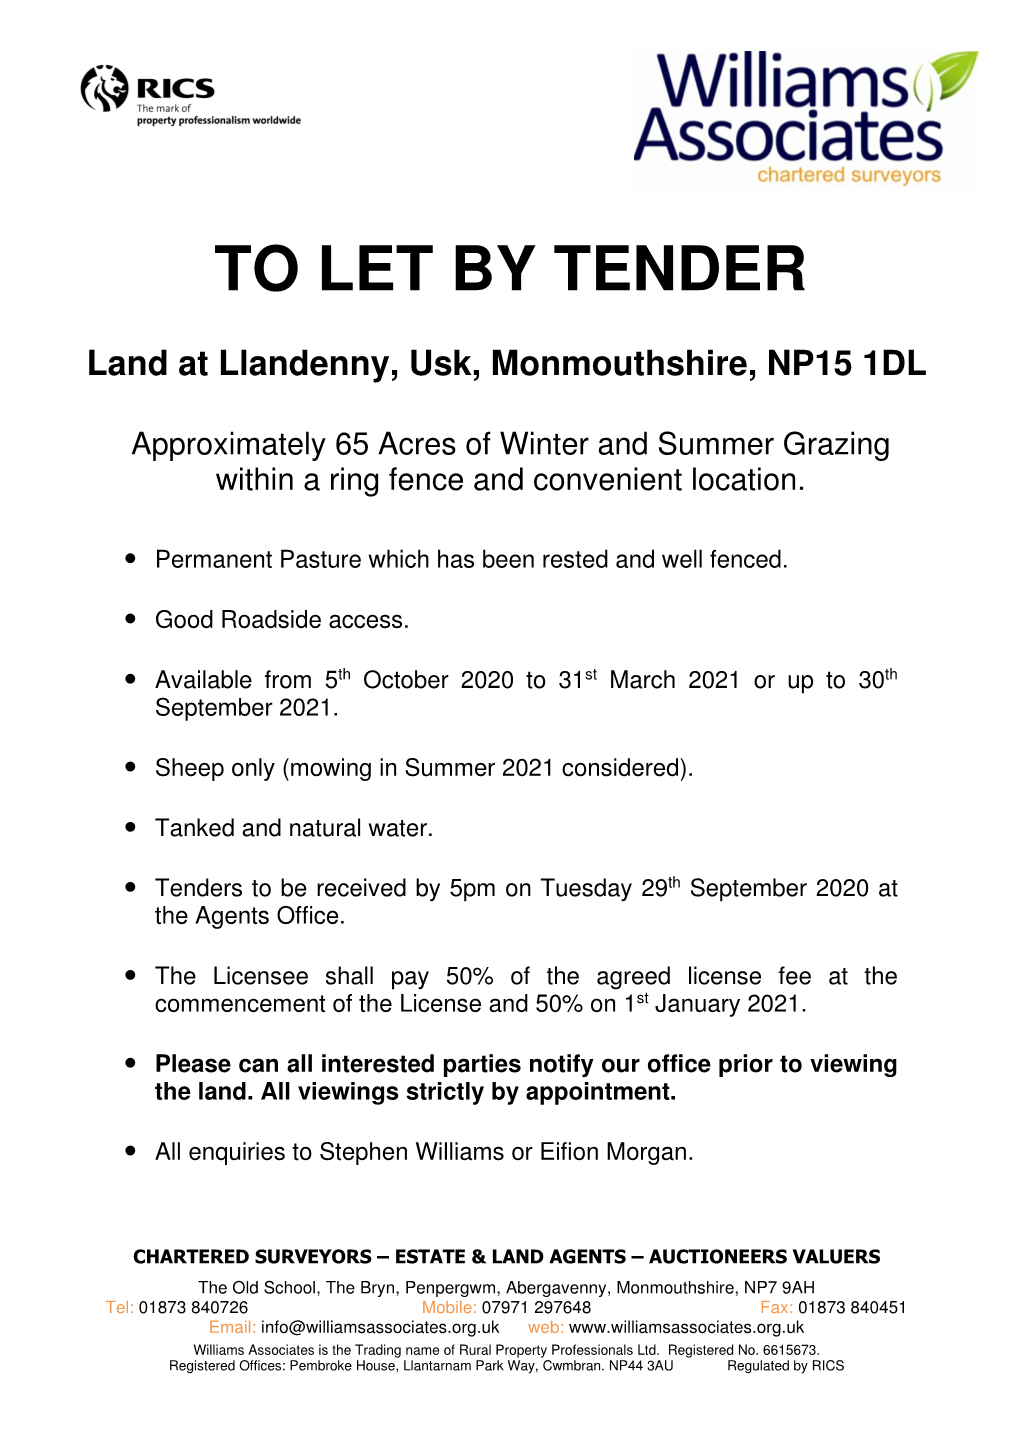 To Let by Tender